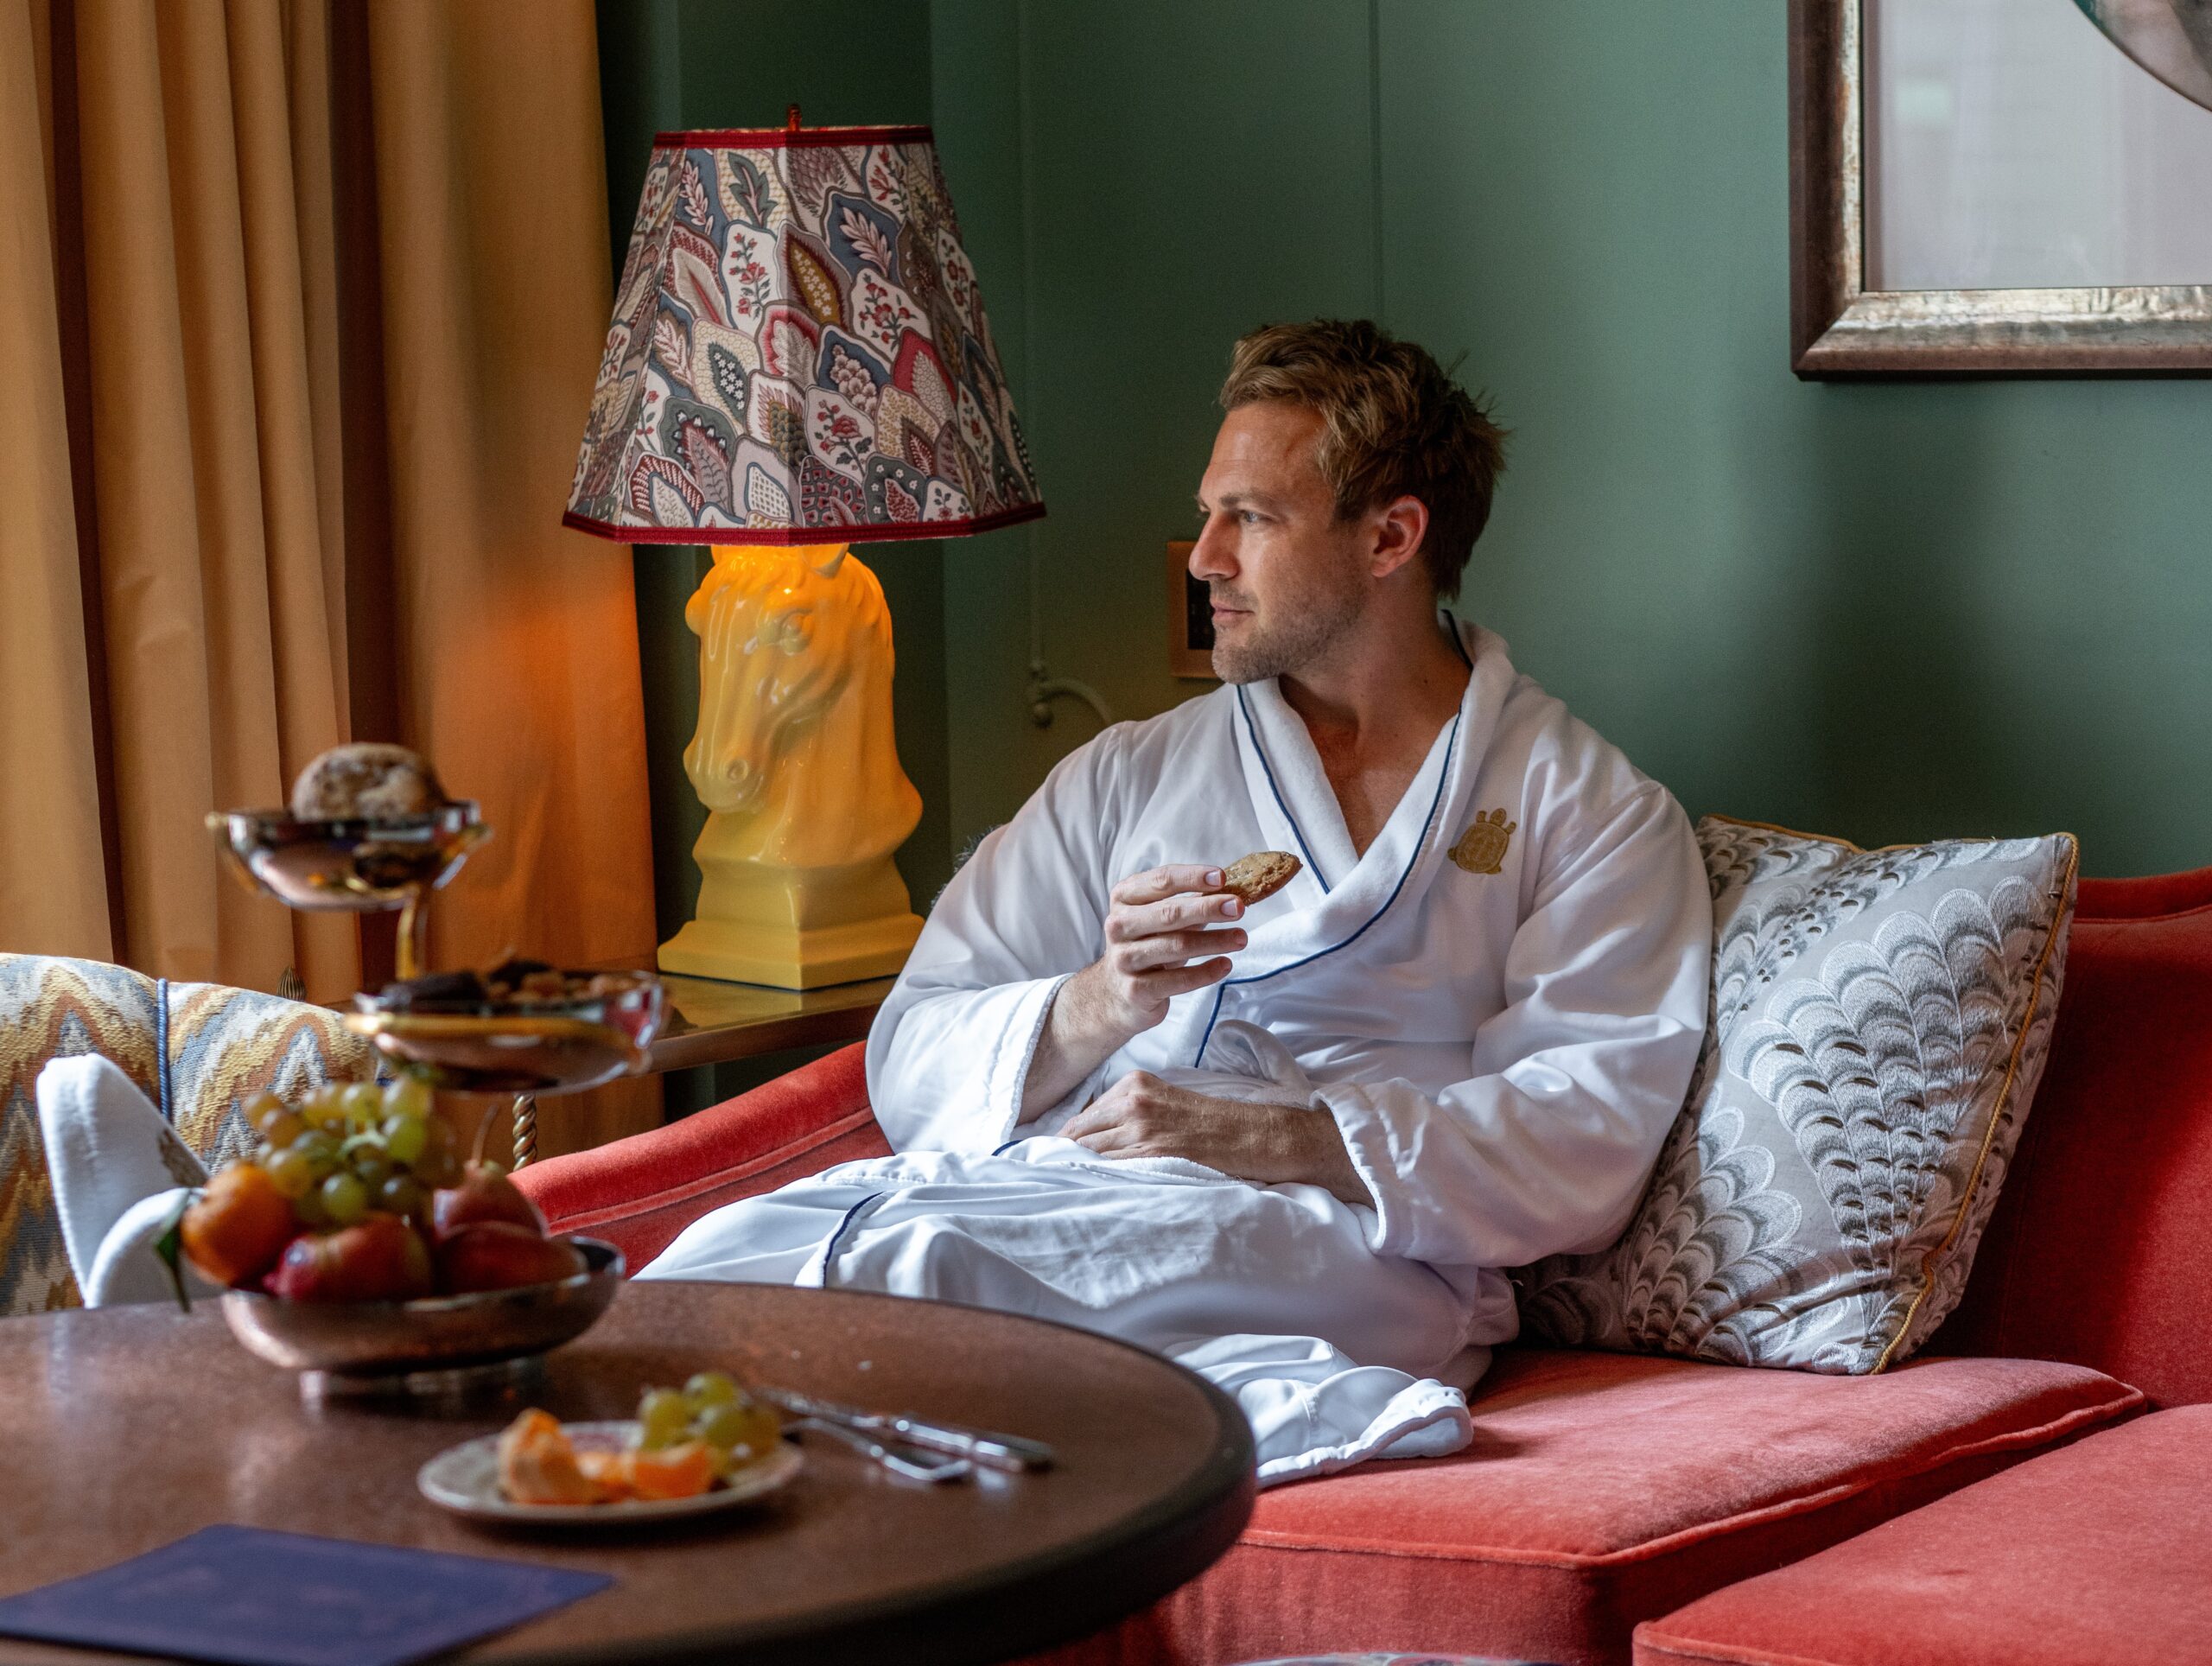 A man in a bathrobe relaxes on a cozy sofa, enjoying breakfast while looking away.